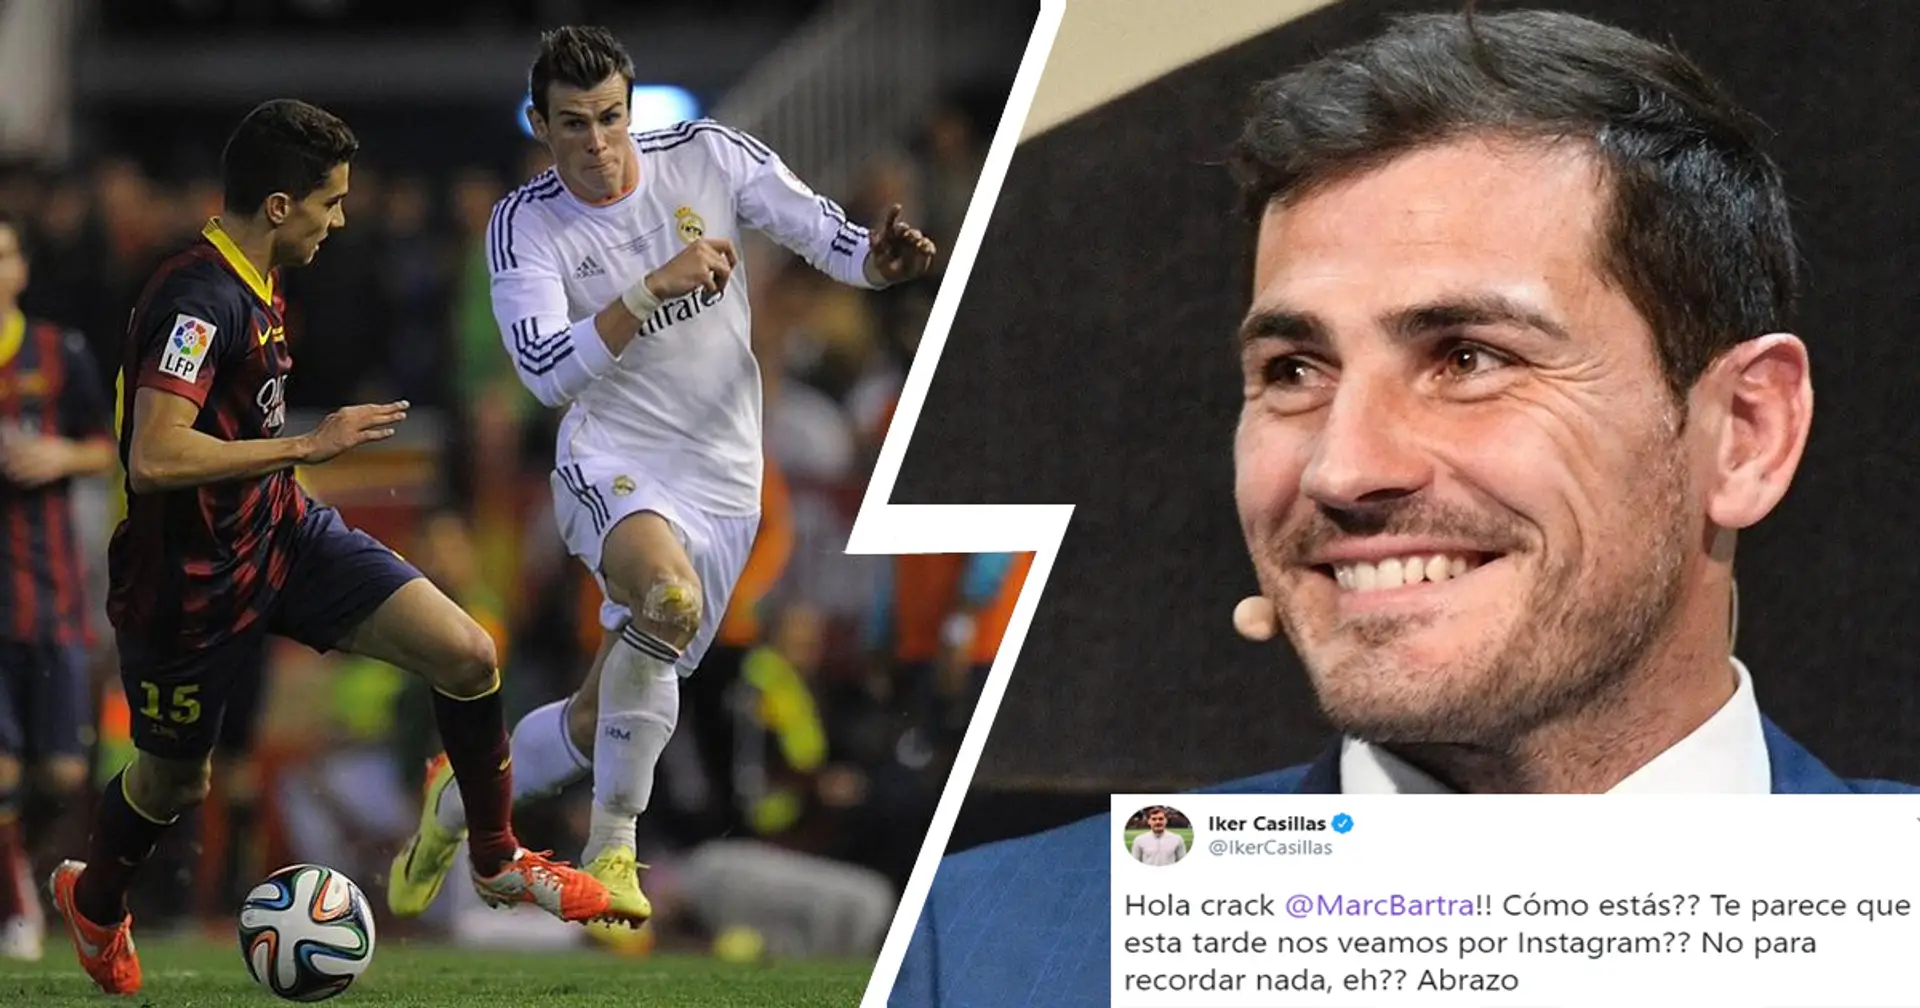 'We have something to remember, no?': Casillas trolls Marc Bartra by offering him to meet on Instagram for THAT Bale's goal anniversary